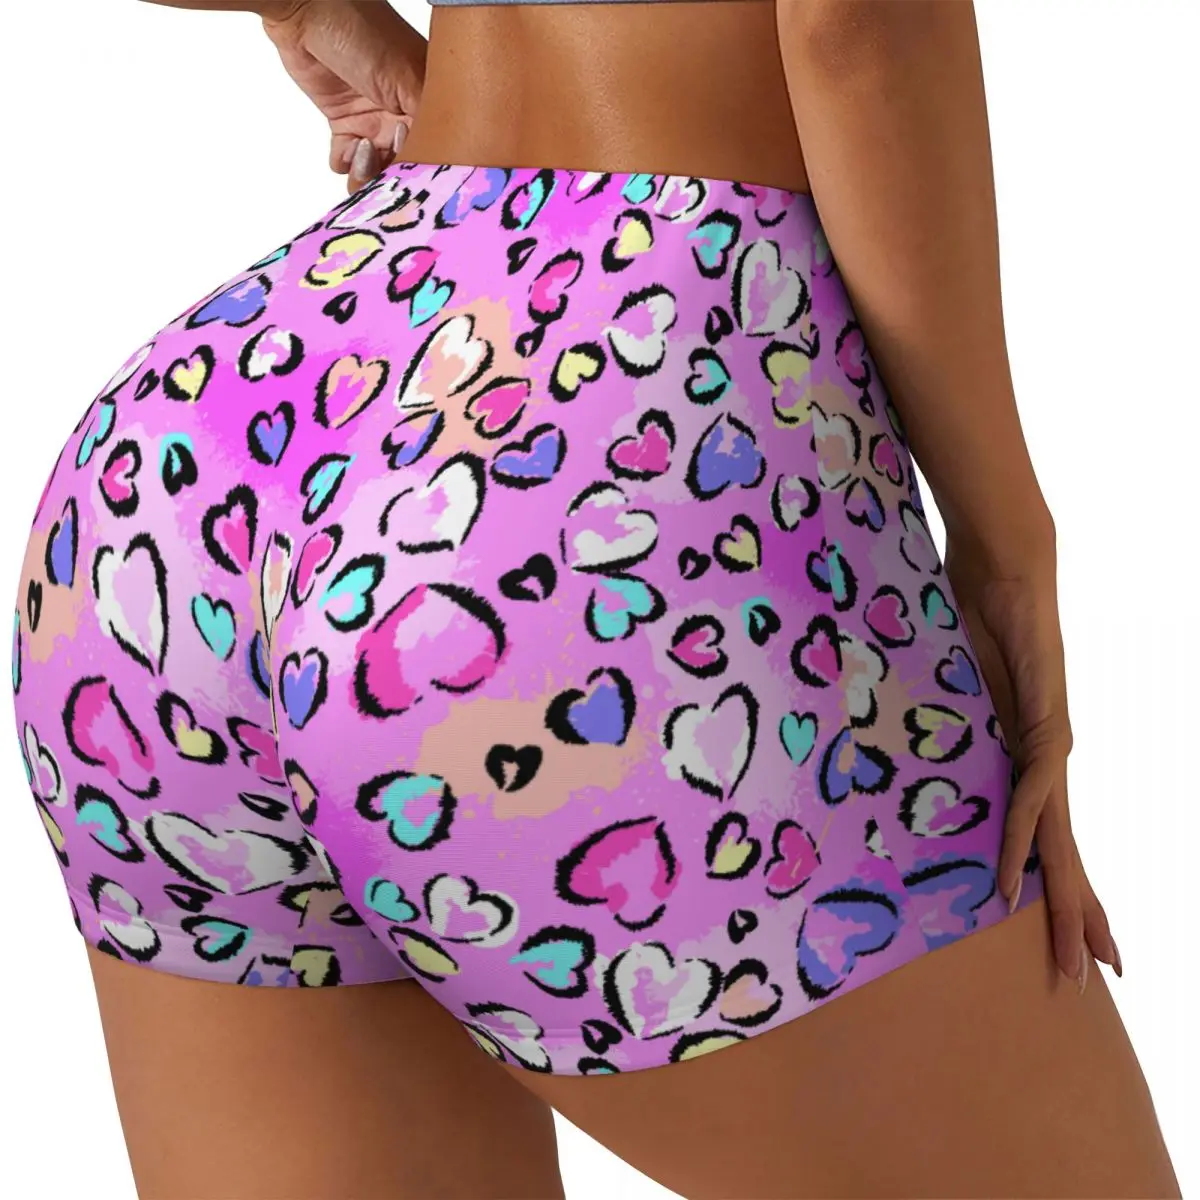 

Fashion Leopard Print With Hearts Women Workout Shorts Seamless Scrunch Butt Lifting Athletic Yoga Fitness Biker Shorts